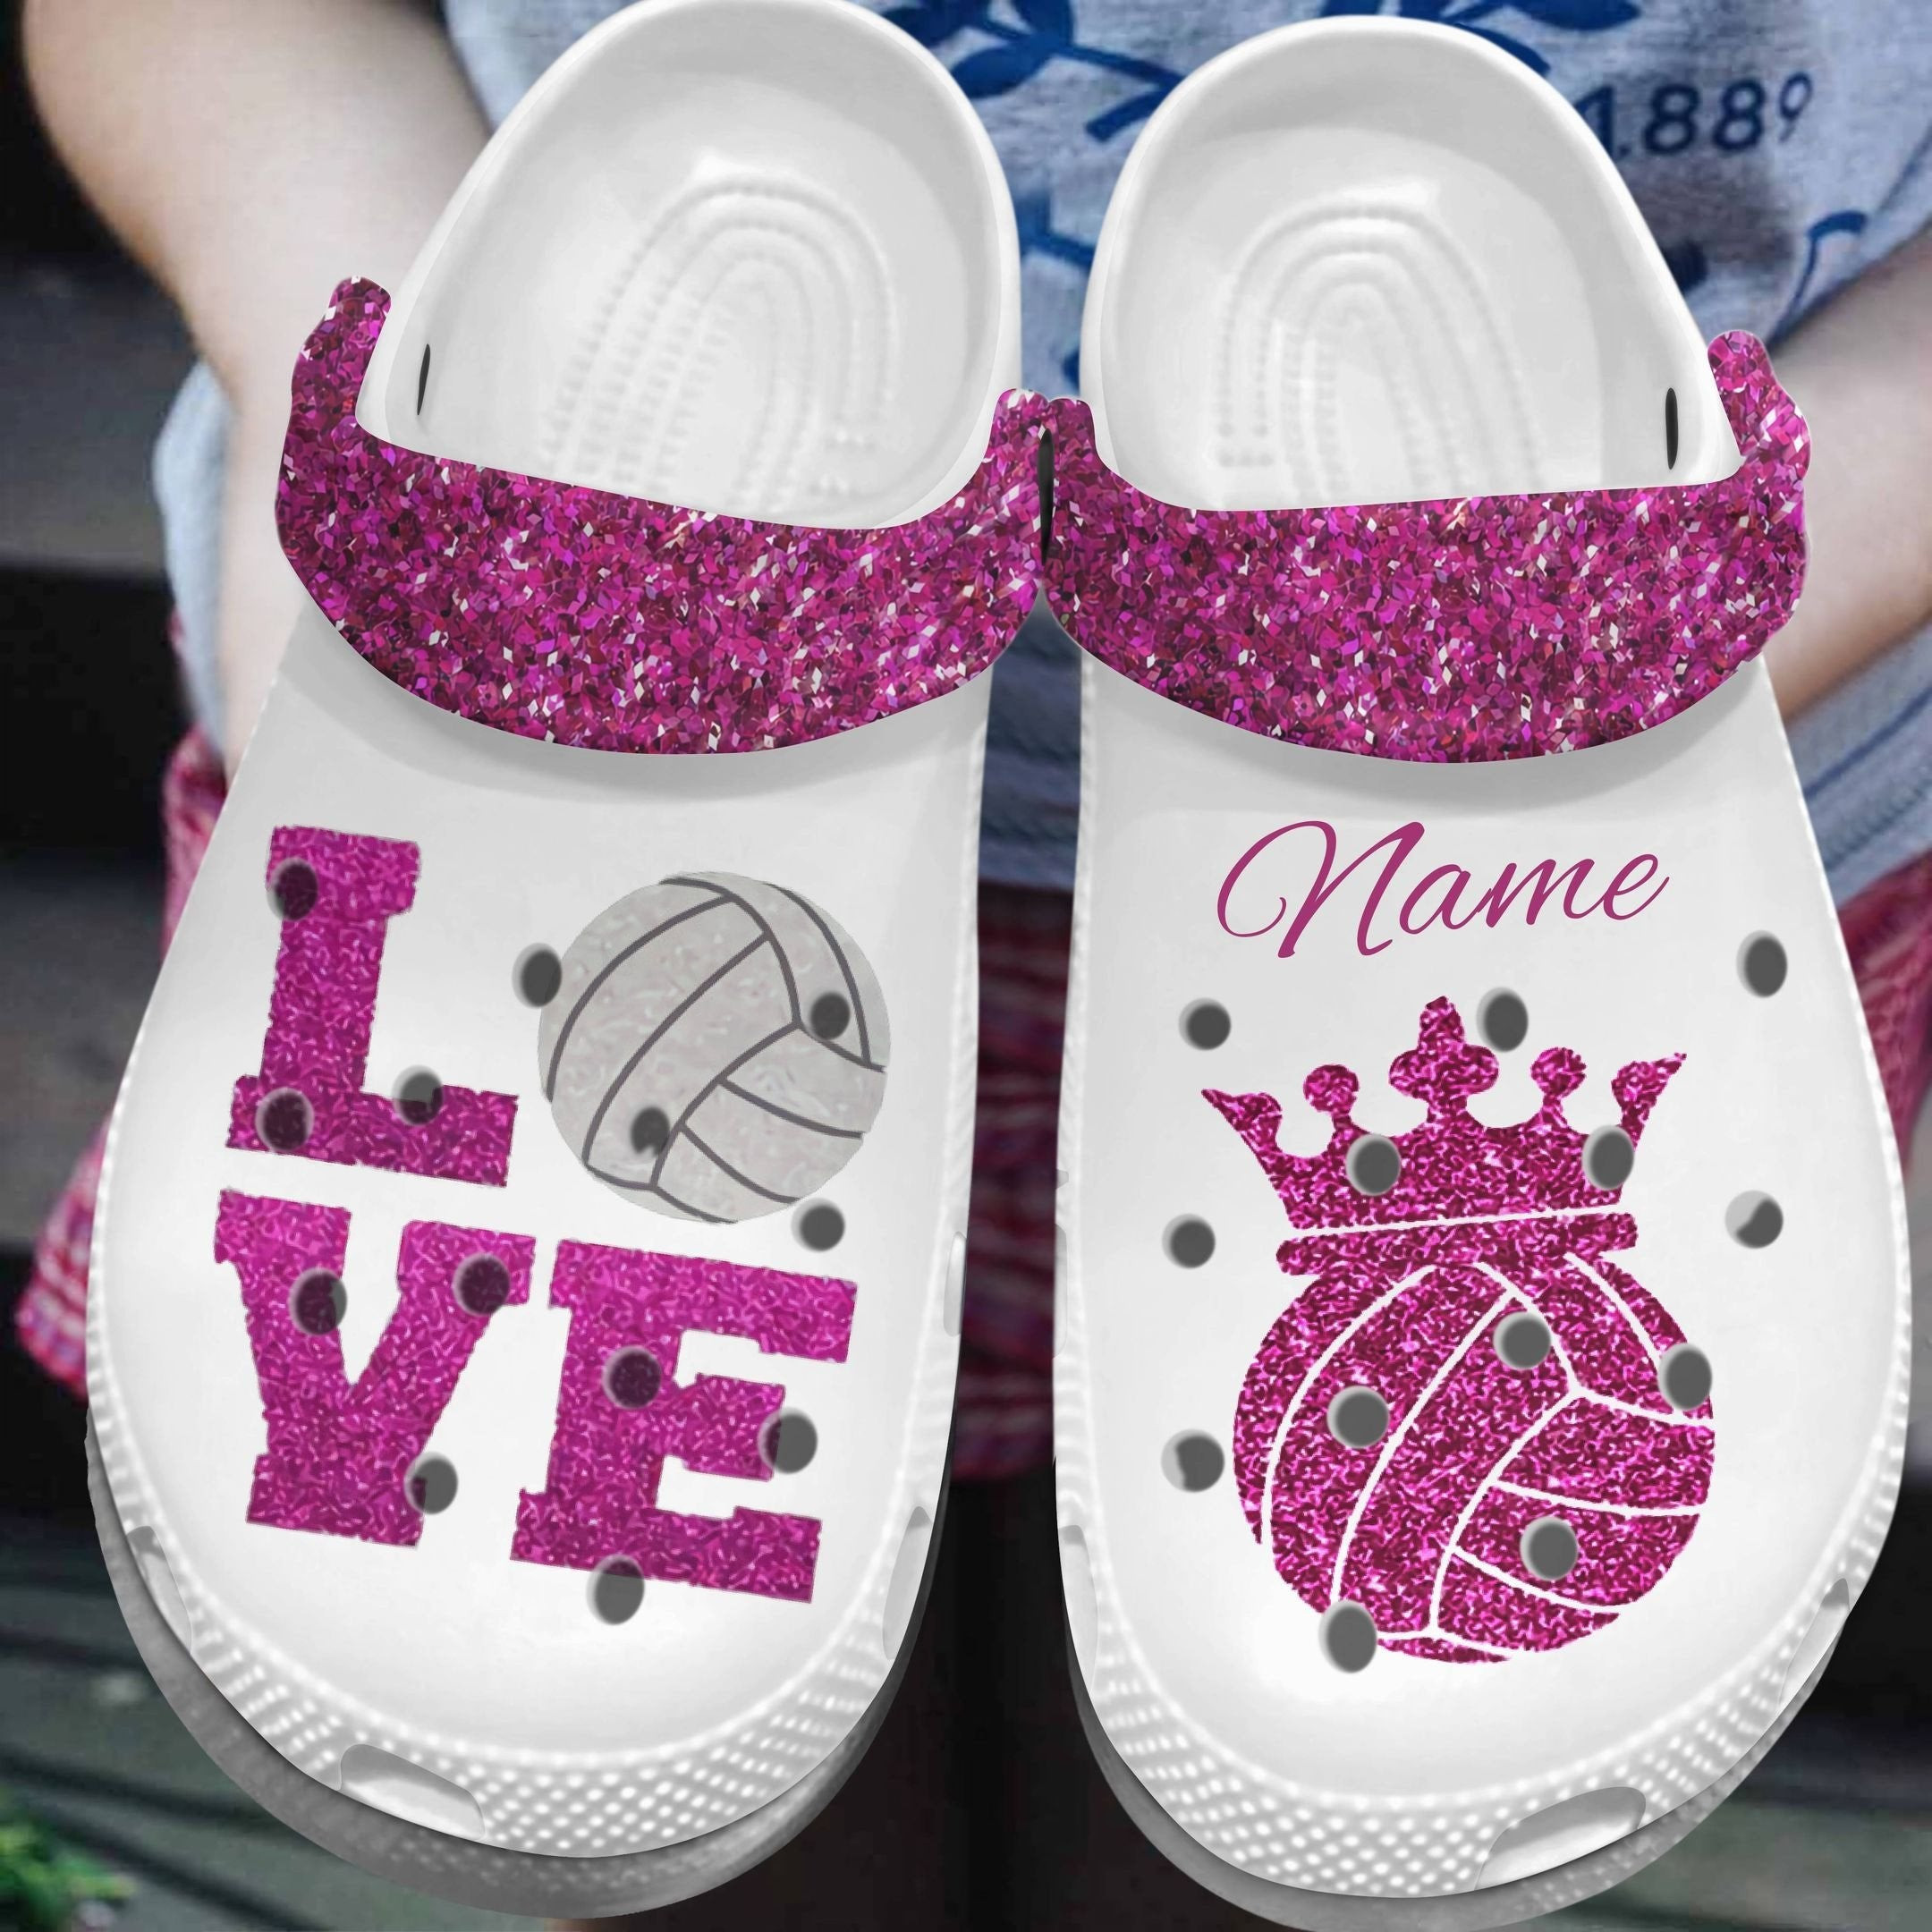 Love Pink Volleyball Shoes - Queen Volleyball Crocs Clogs Gift For Women Girl